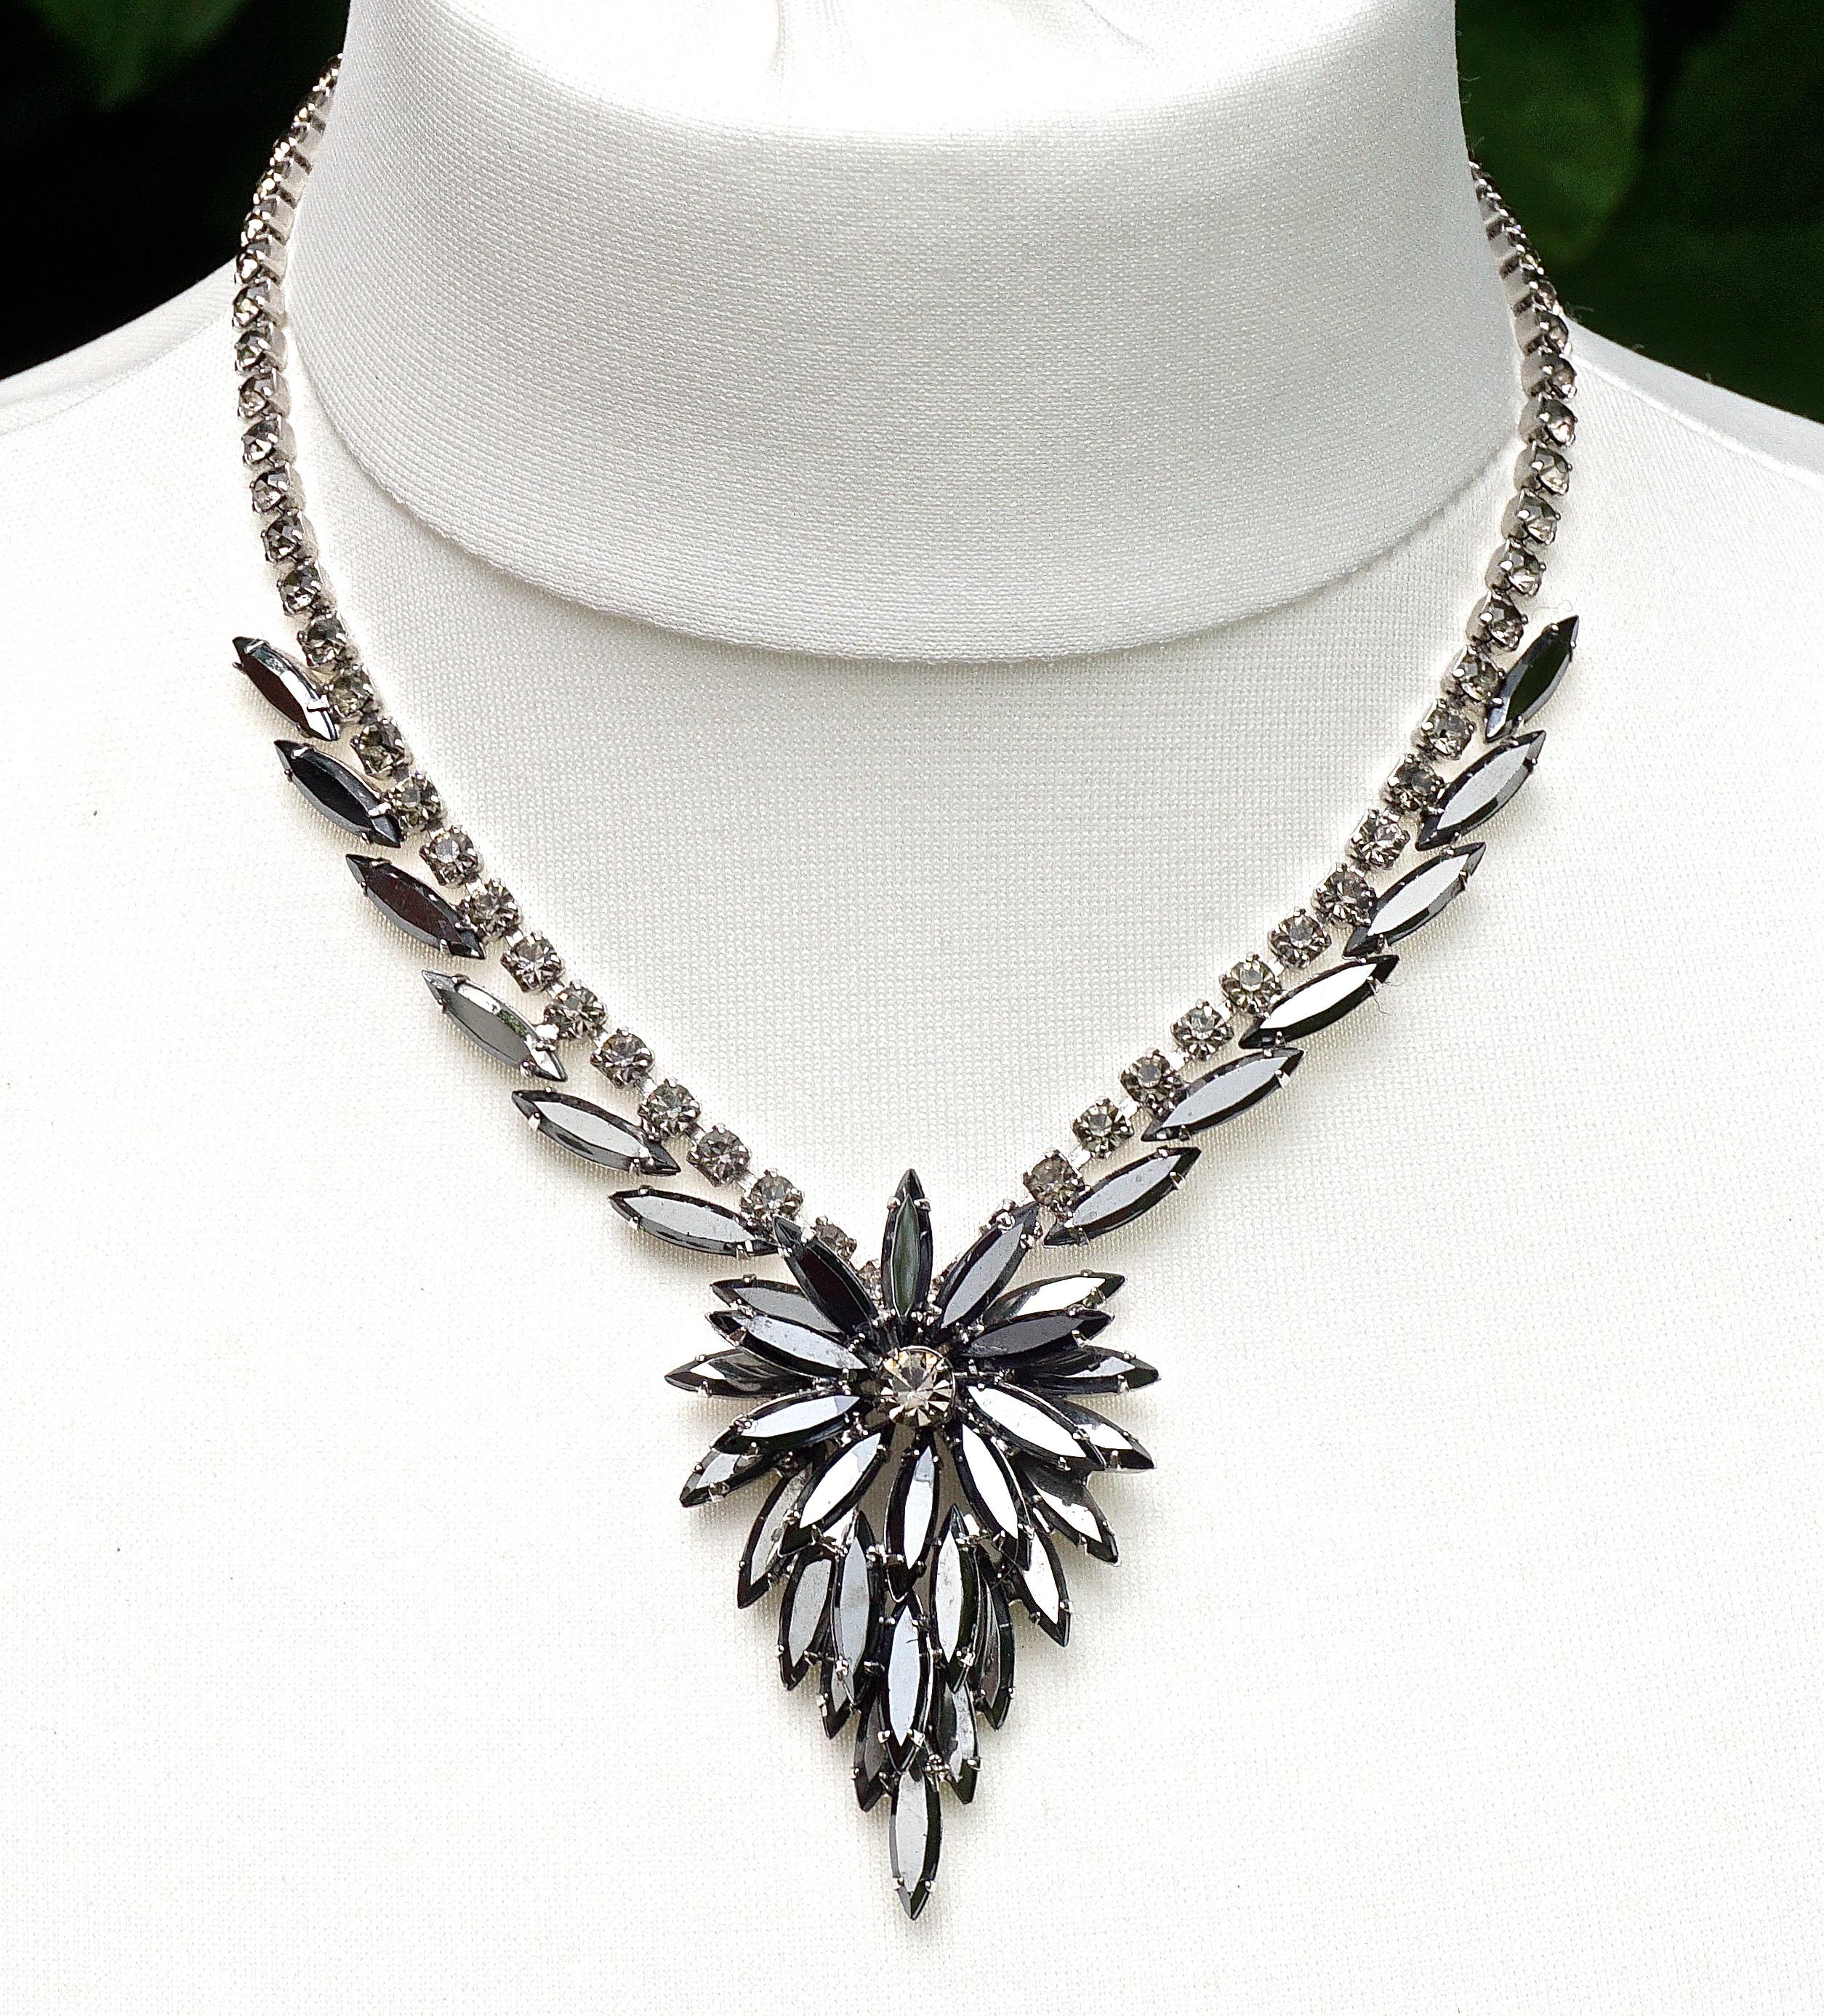 Fabulous Juliana Delizza & Elster silver tone necklace, bracelet and earrings parure. The parure is designed with black diamonds (which are actually dark grey rhinestones) and dark grey navette rhinestones. The set is in very good condition. 

The